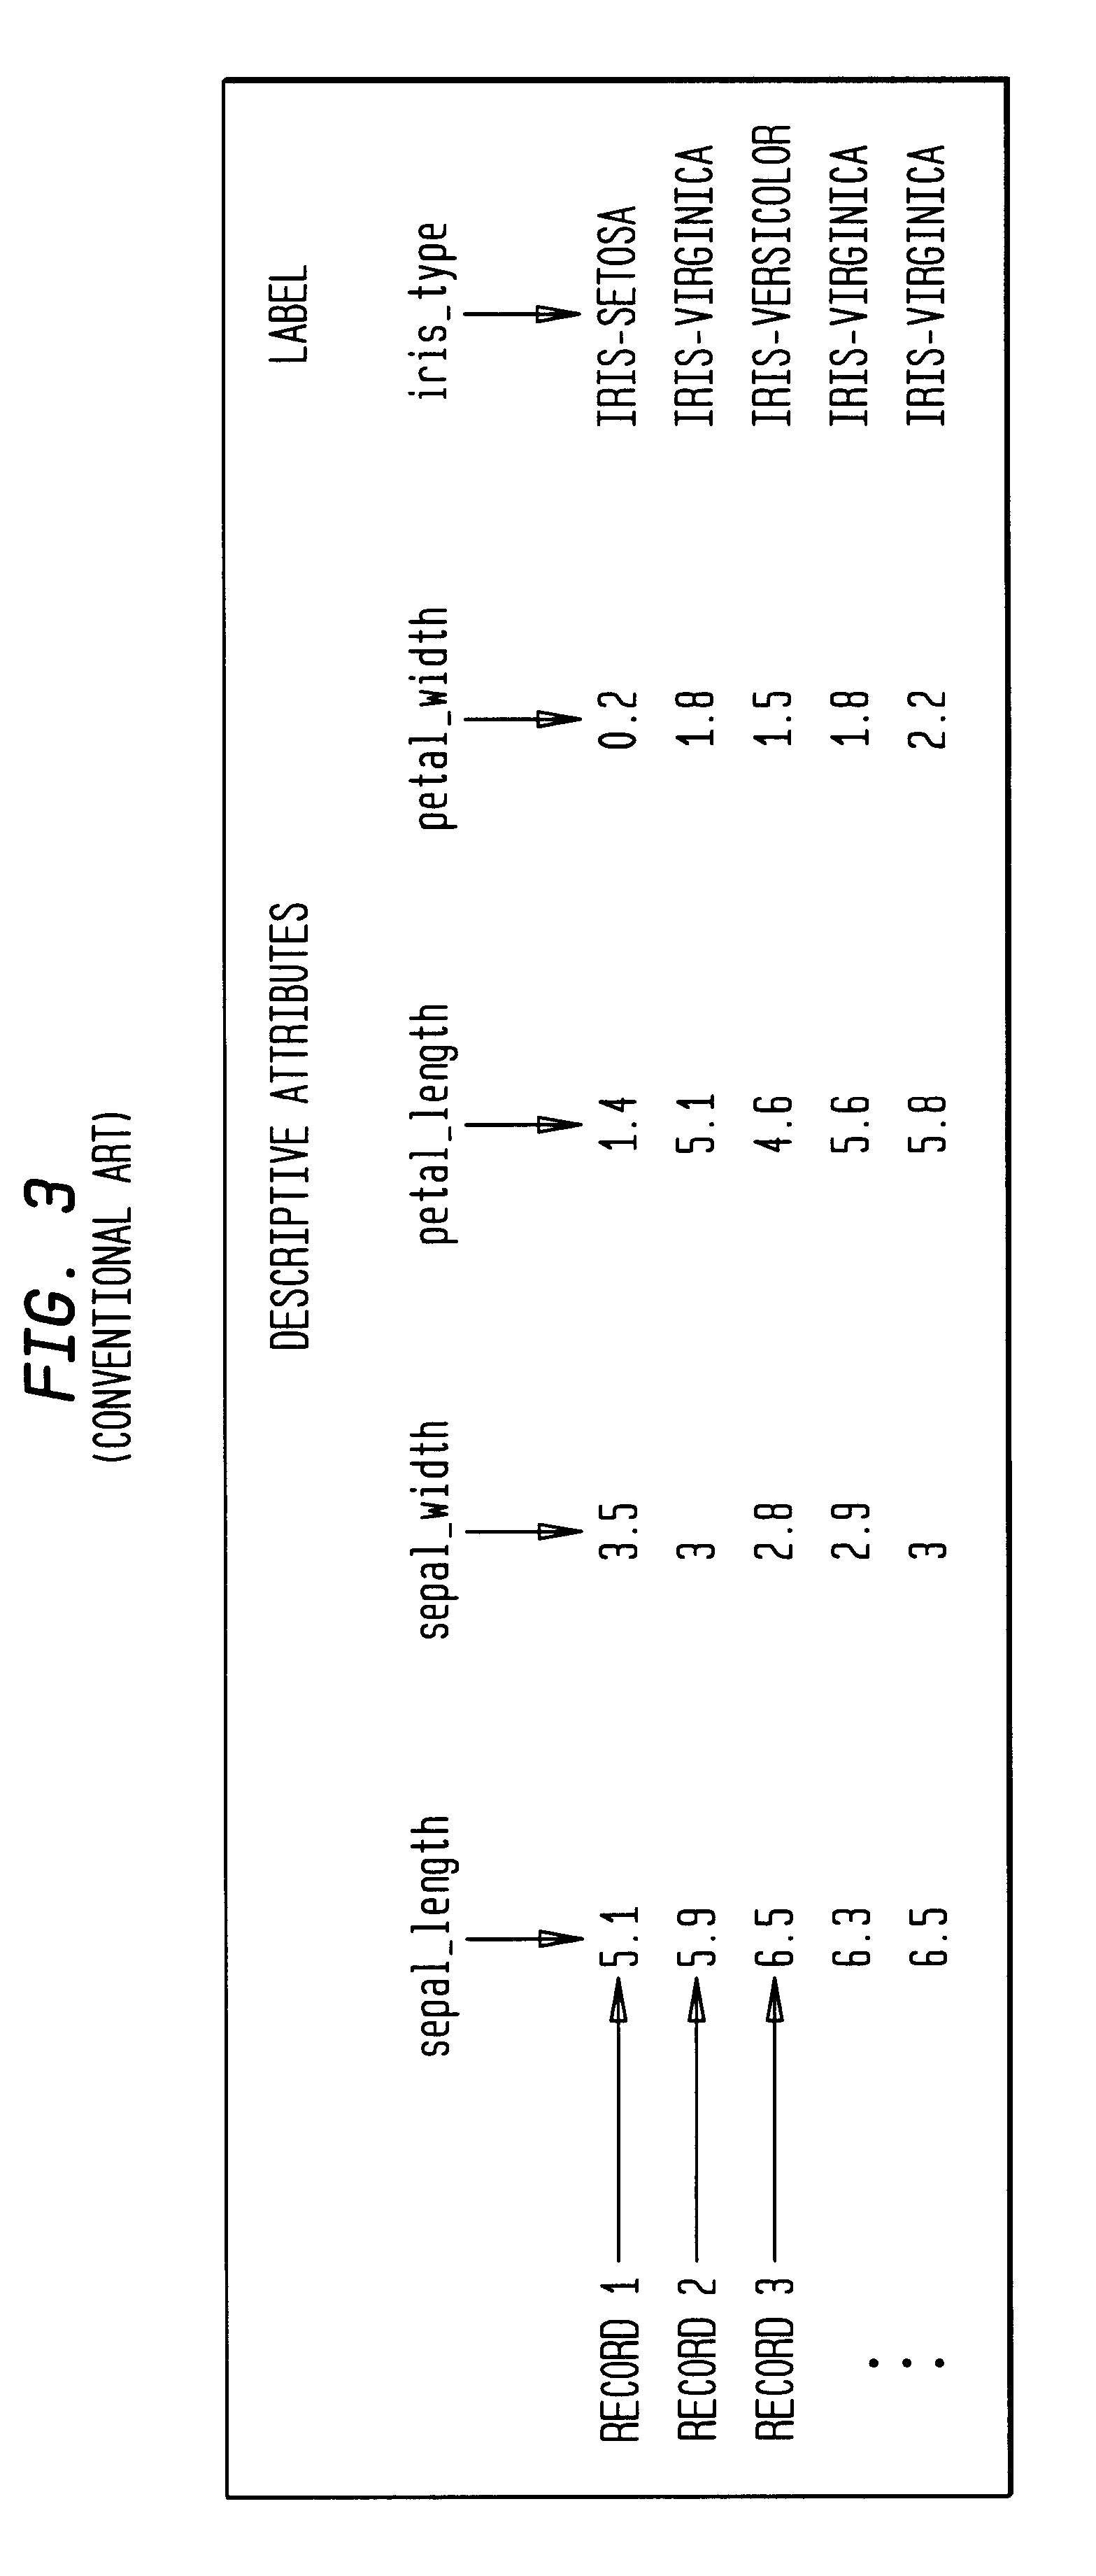 Method, system, and computer program product for visualizing a data structure